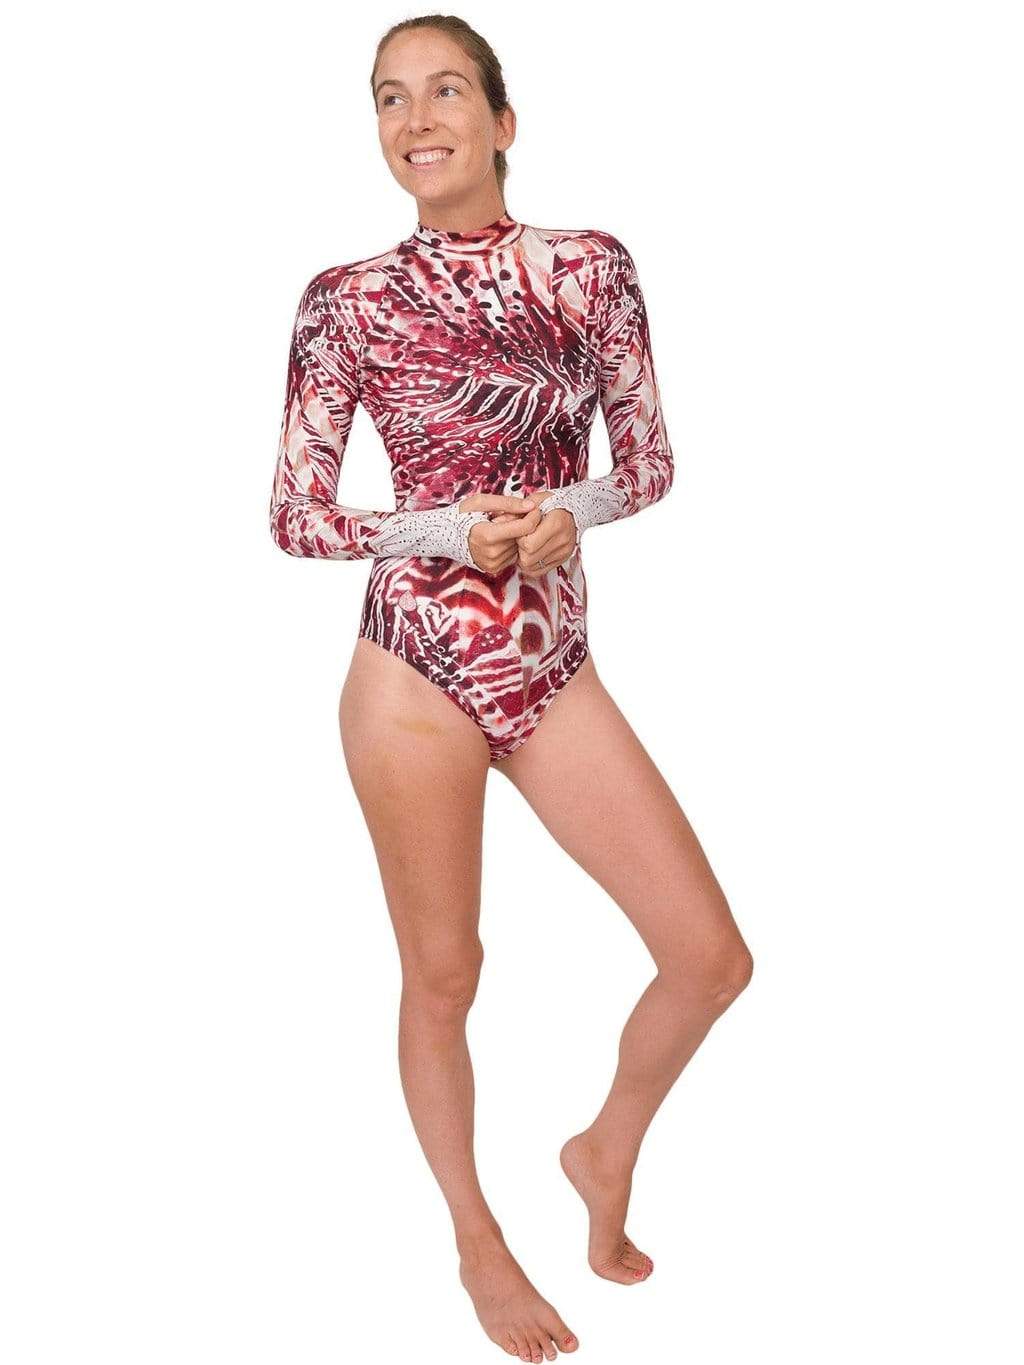 Lionfish Sun Suit | Long Sleeve One Piece Swim Suit | Swim | Dive Skin | Surf | UPF 50+ | Female [L] | Recycled Polyester/Spandex